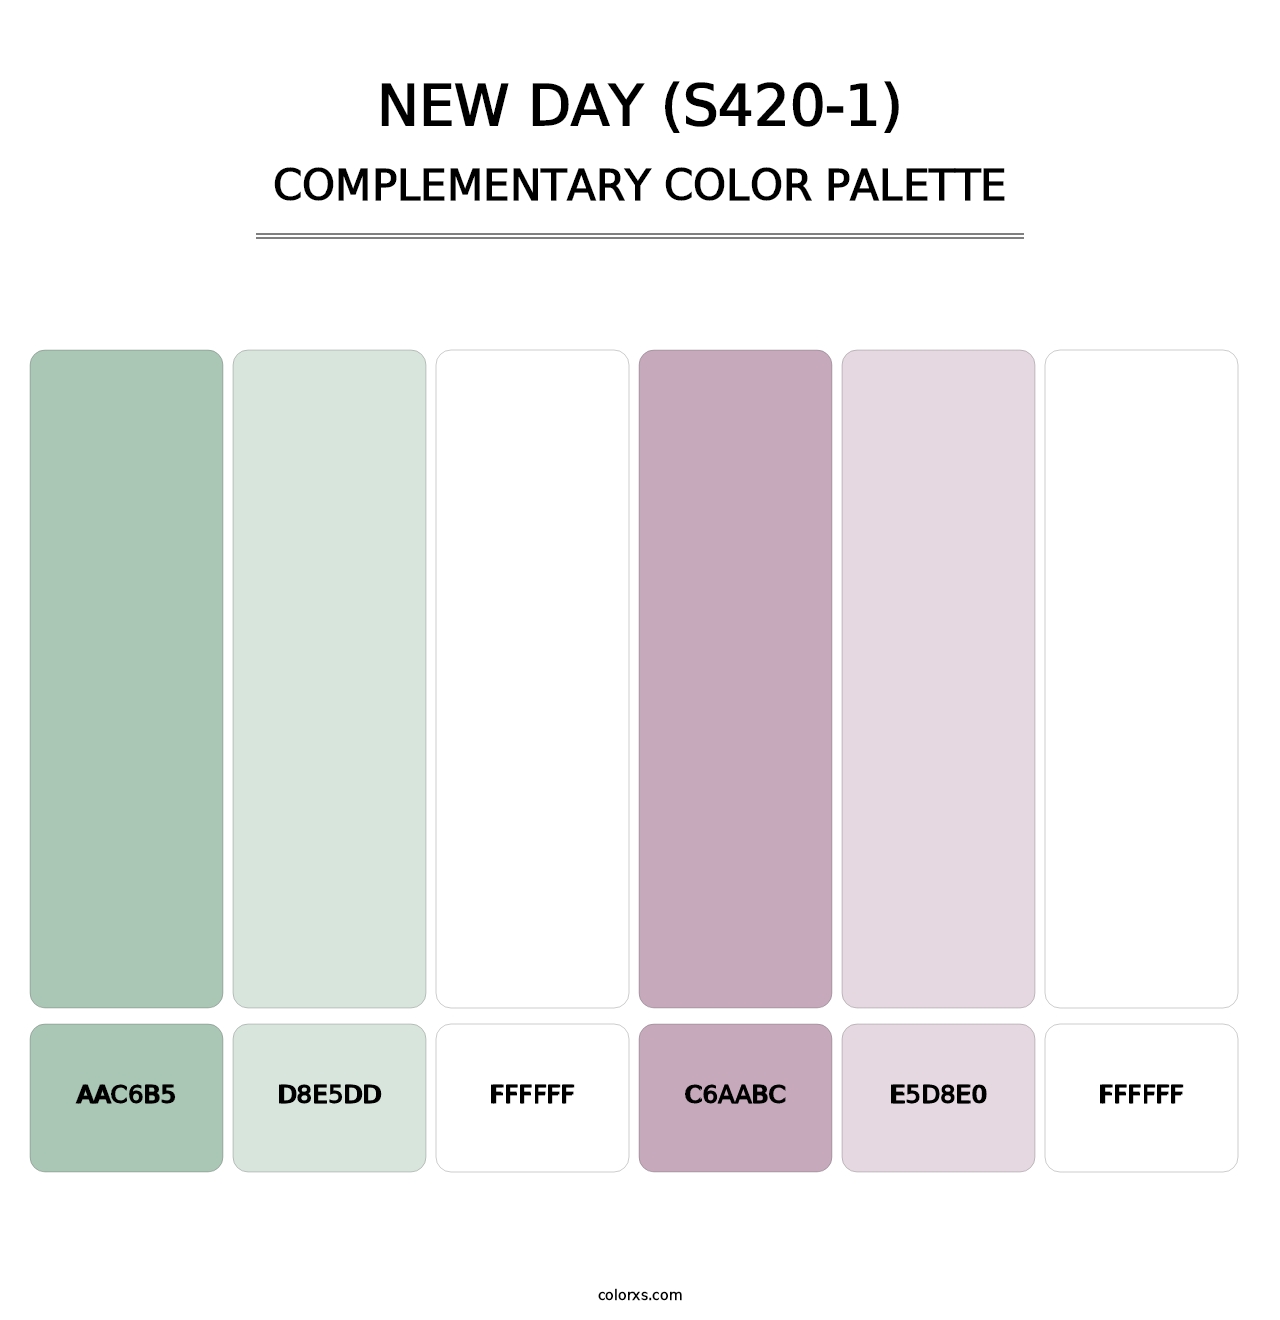 New Day (S420-1) - Complementary Color Palette